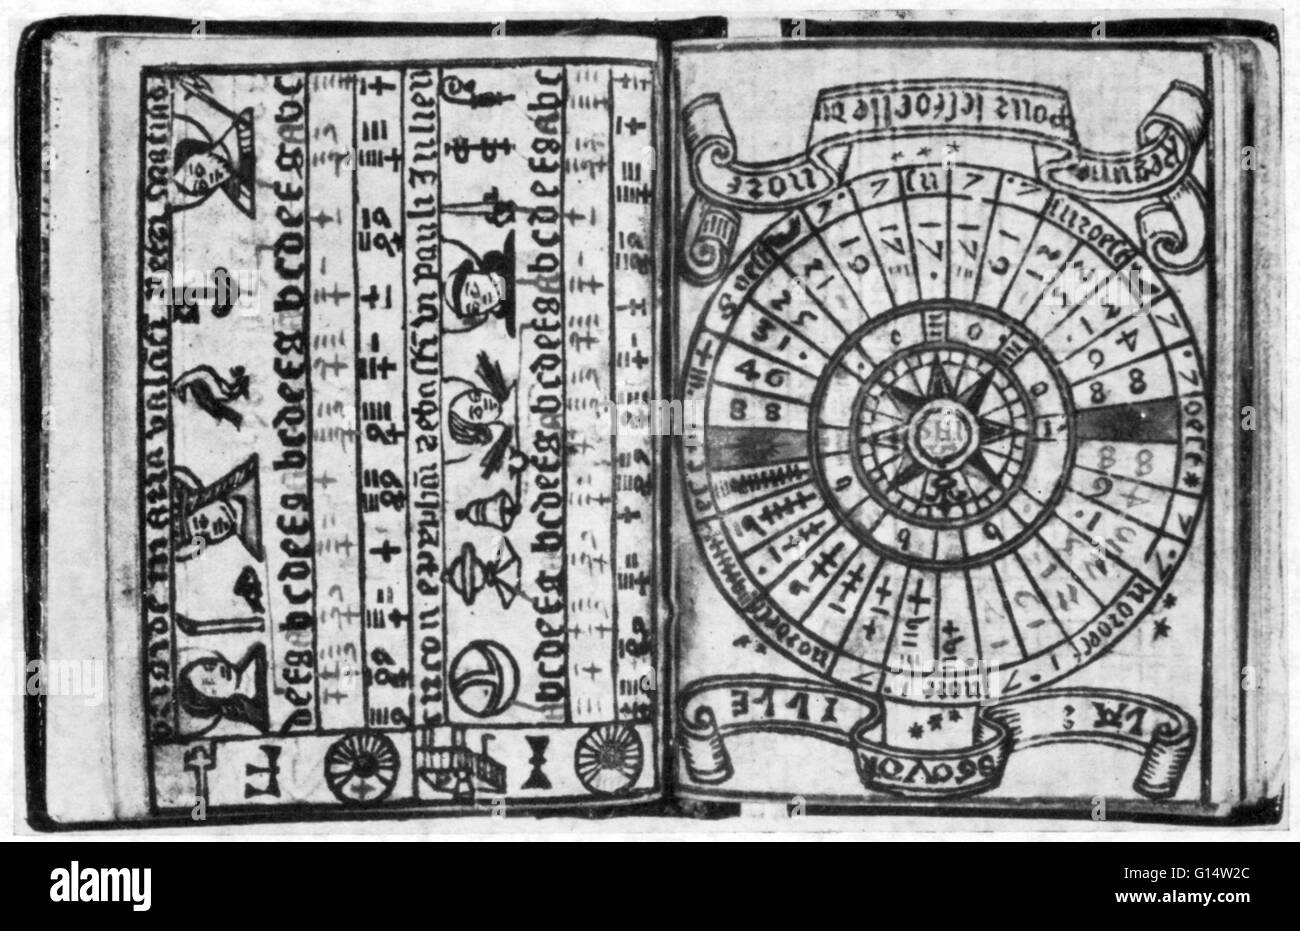 'The rule of the north star, and distance to raise or lay 1 degree of latitude, and the almanac for January and February, in Brouscon's Tide-tables and Almanac of c. 1545.' Guillaume Brouscon was a Breton mapmaker of the Dieppe school in the 16th century. Stock Photo